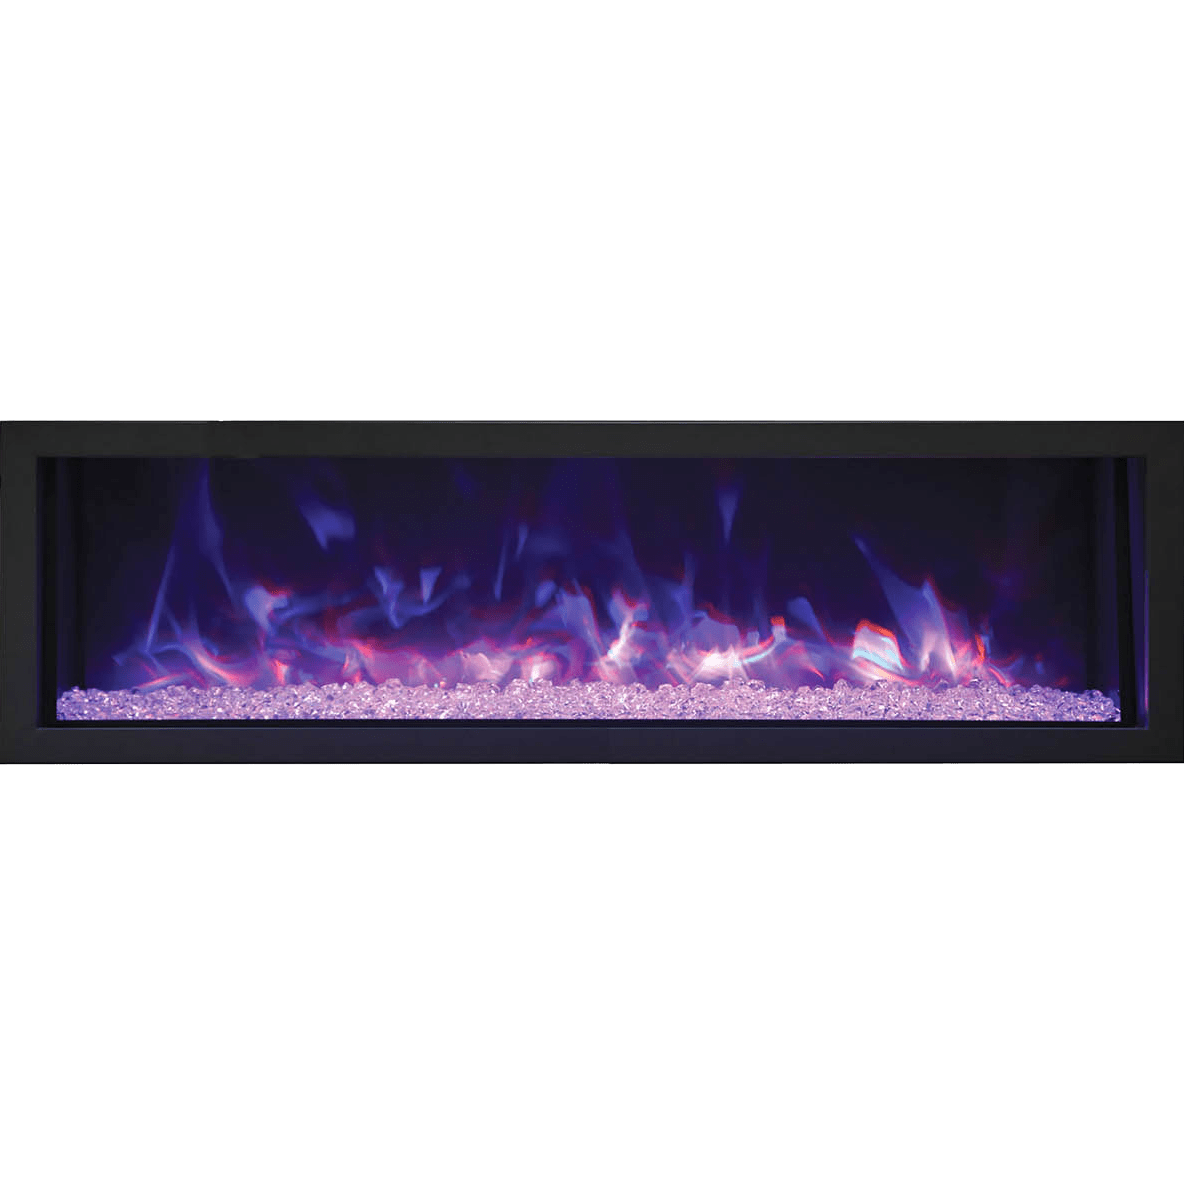 Remii Extra Slim Indoor/Outdoor Built-In Electric Fireplace 55-Inch Purple flame with Glass - Primary View